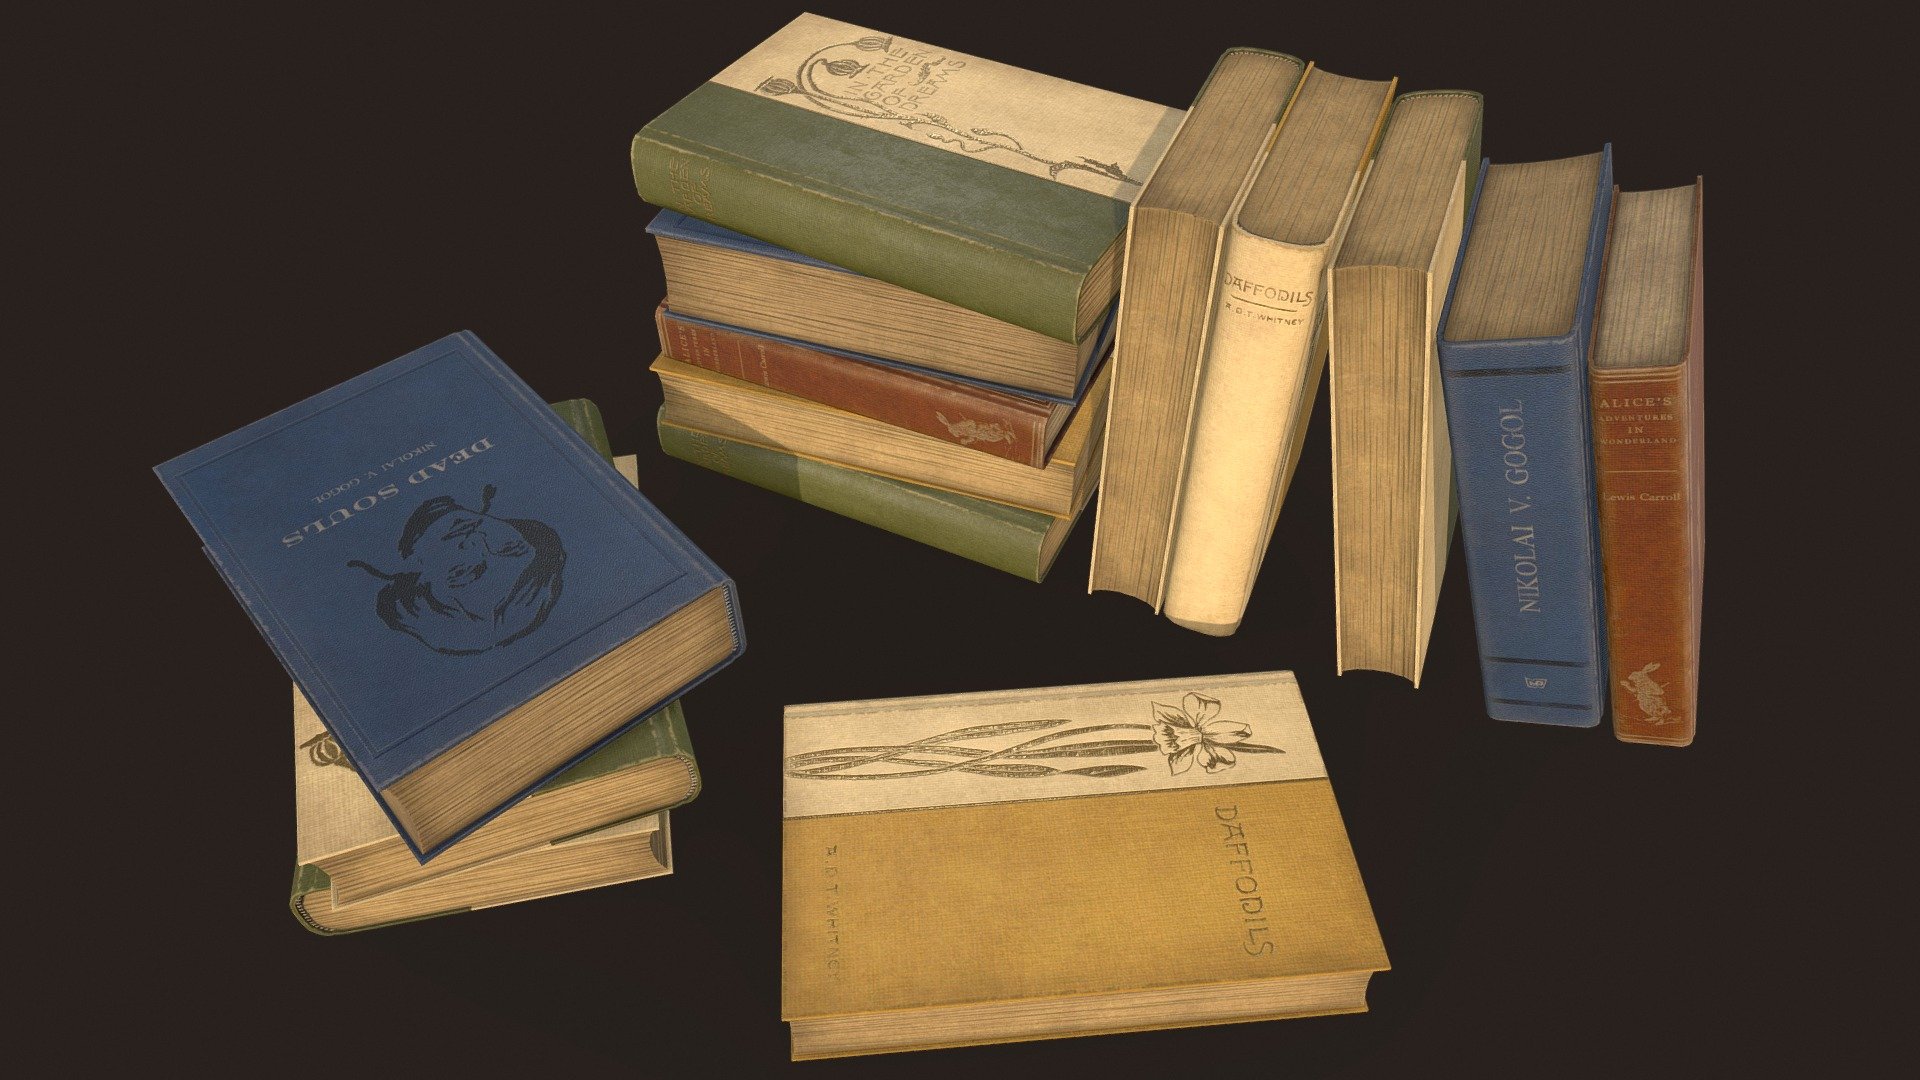 Old Books it's a lowpoly game ready set of books with unwrapped UVs and PBR textures.

This set includes 4 different books (4 meshes and 1 material). 

UVs: channel 1: overlapping; channel 2: non-overlapping (for baking lightmaps).

Formats: FBX, Obj. Marmoset Toolbag scene 3.08 (.tbscene) Textures format: TGA. Textures resolution: 2048x2048px.

Textures set includes:




Metal_Roughness: BaseColor, Roughness, Metallic, Normal, Height, AO.

Unity 5 (Standart Metallic): AlbedoTransparency, AO, Normal, MetallicSmoothness.

Unreal Engine 4: BaseColor, OcclusionRoughnessMetallic, Normal.



Artstation: https://www.artstation.com/tatianagladkaya

Instagram: https://www.instagram.com/t.gladkaya_ - Old Books - 3D model by Tatiana Gladkaya (@tatiana_gladkaya) 3d model